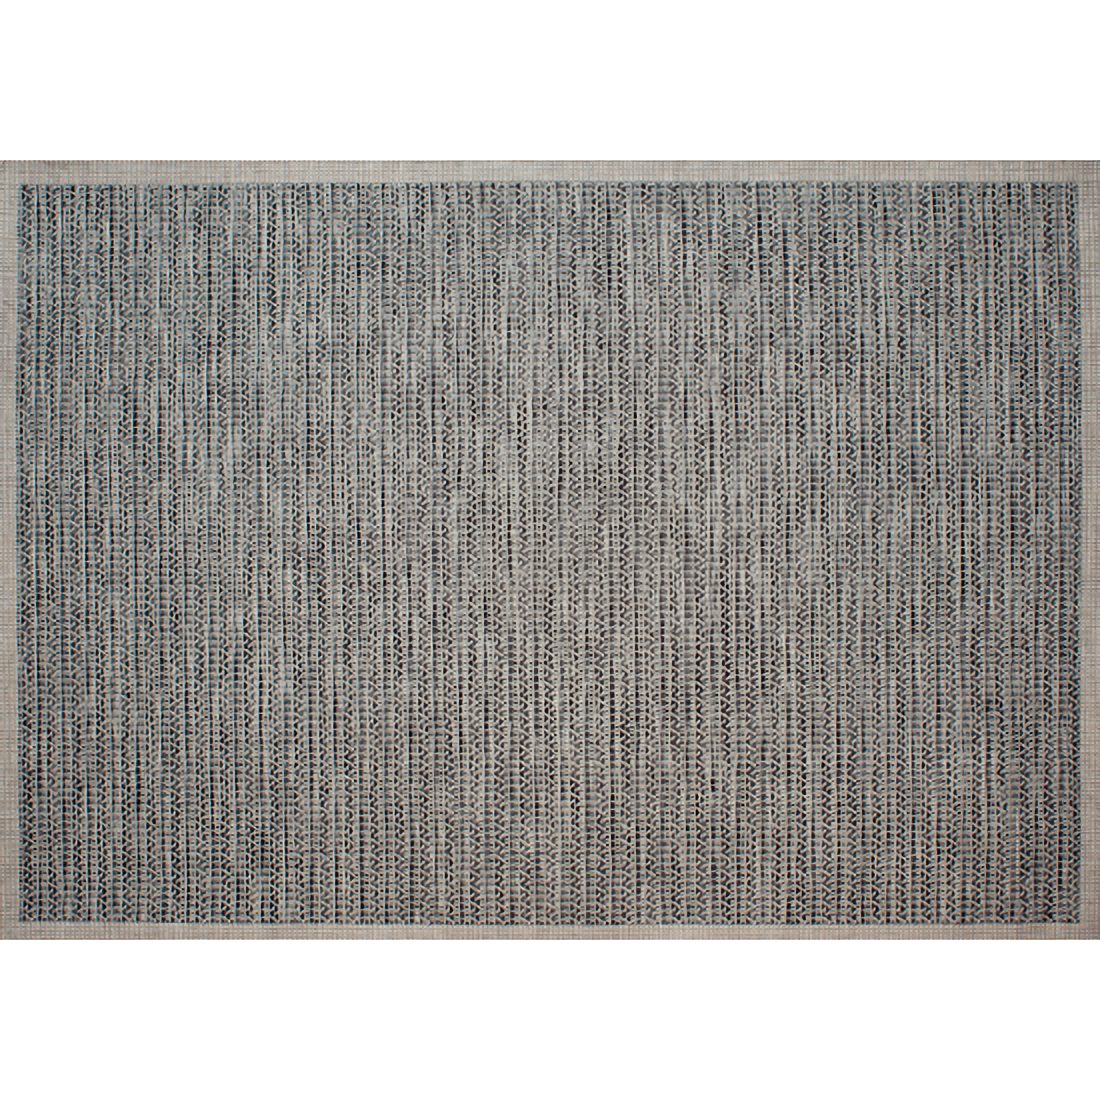 Gold Collection Outdoor Rugs 7'10" x 10' North Shore - Pebble